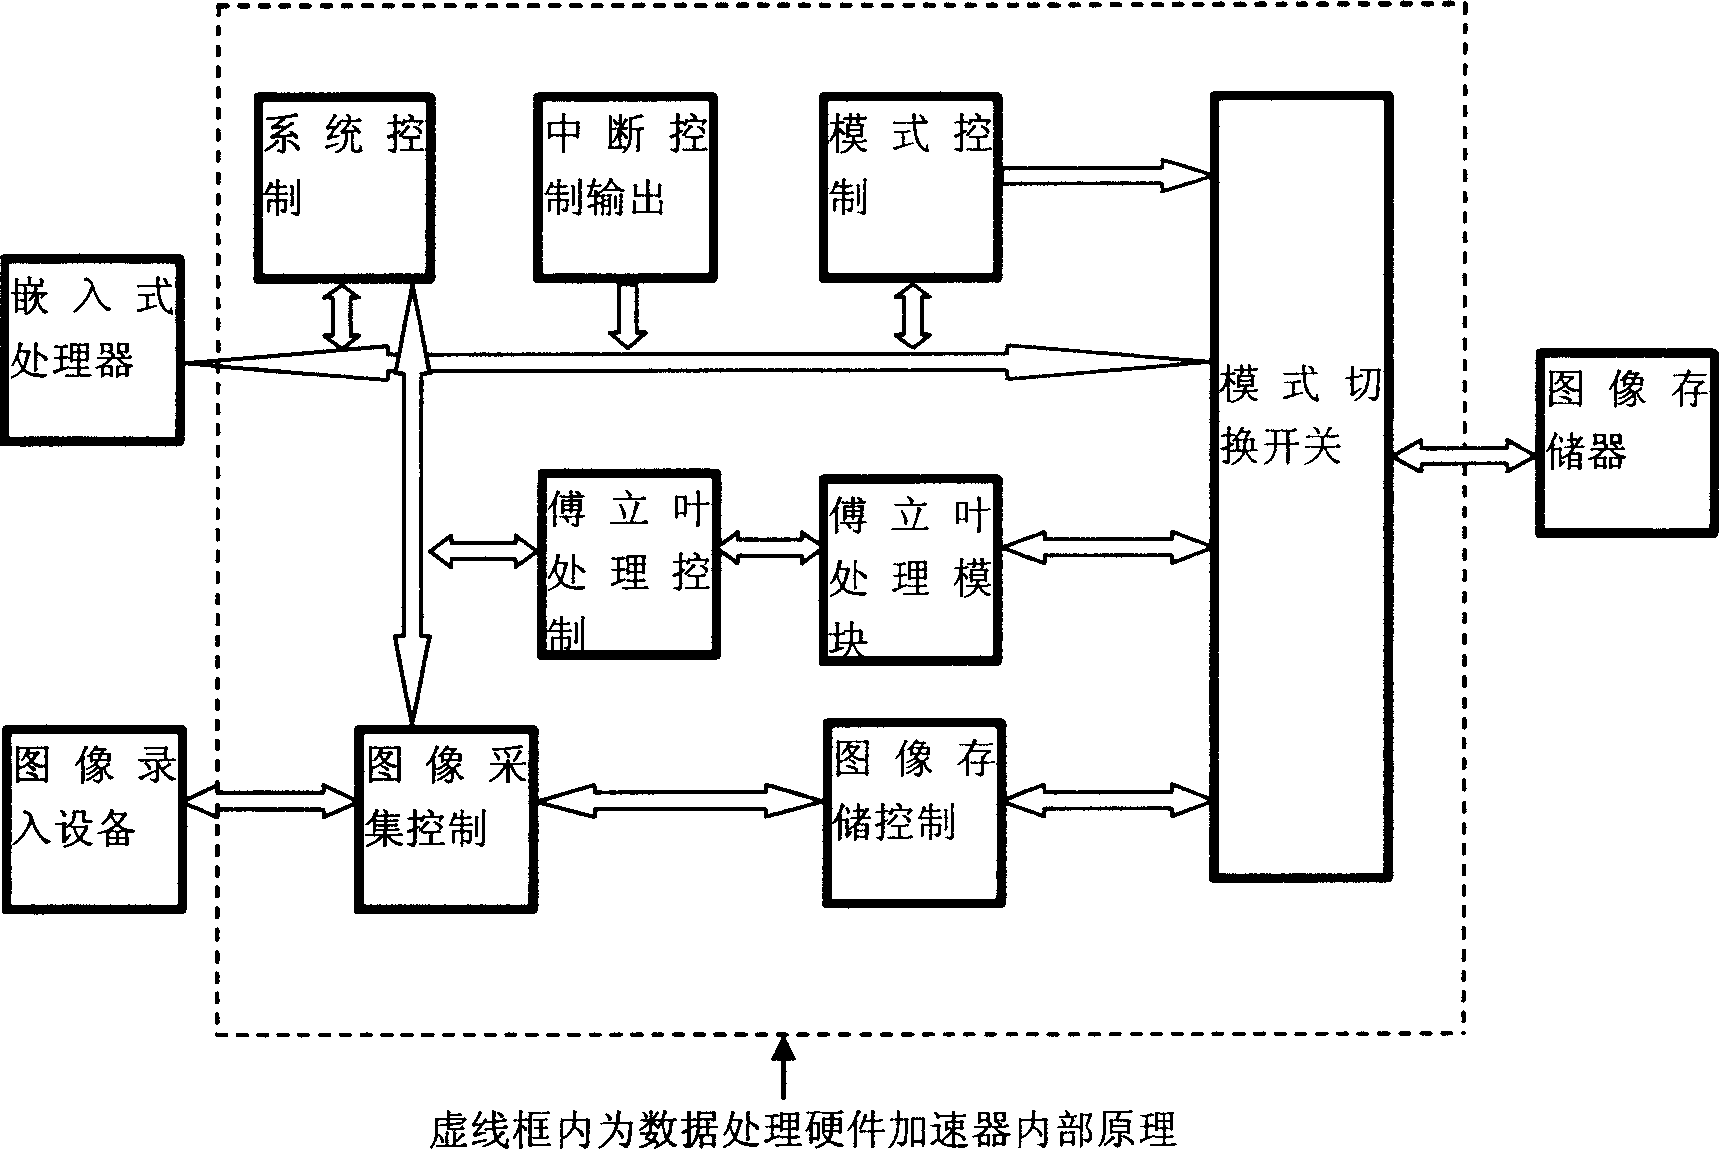 High-speed image matching detecting system and method